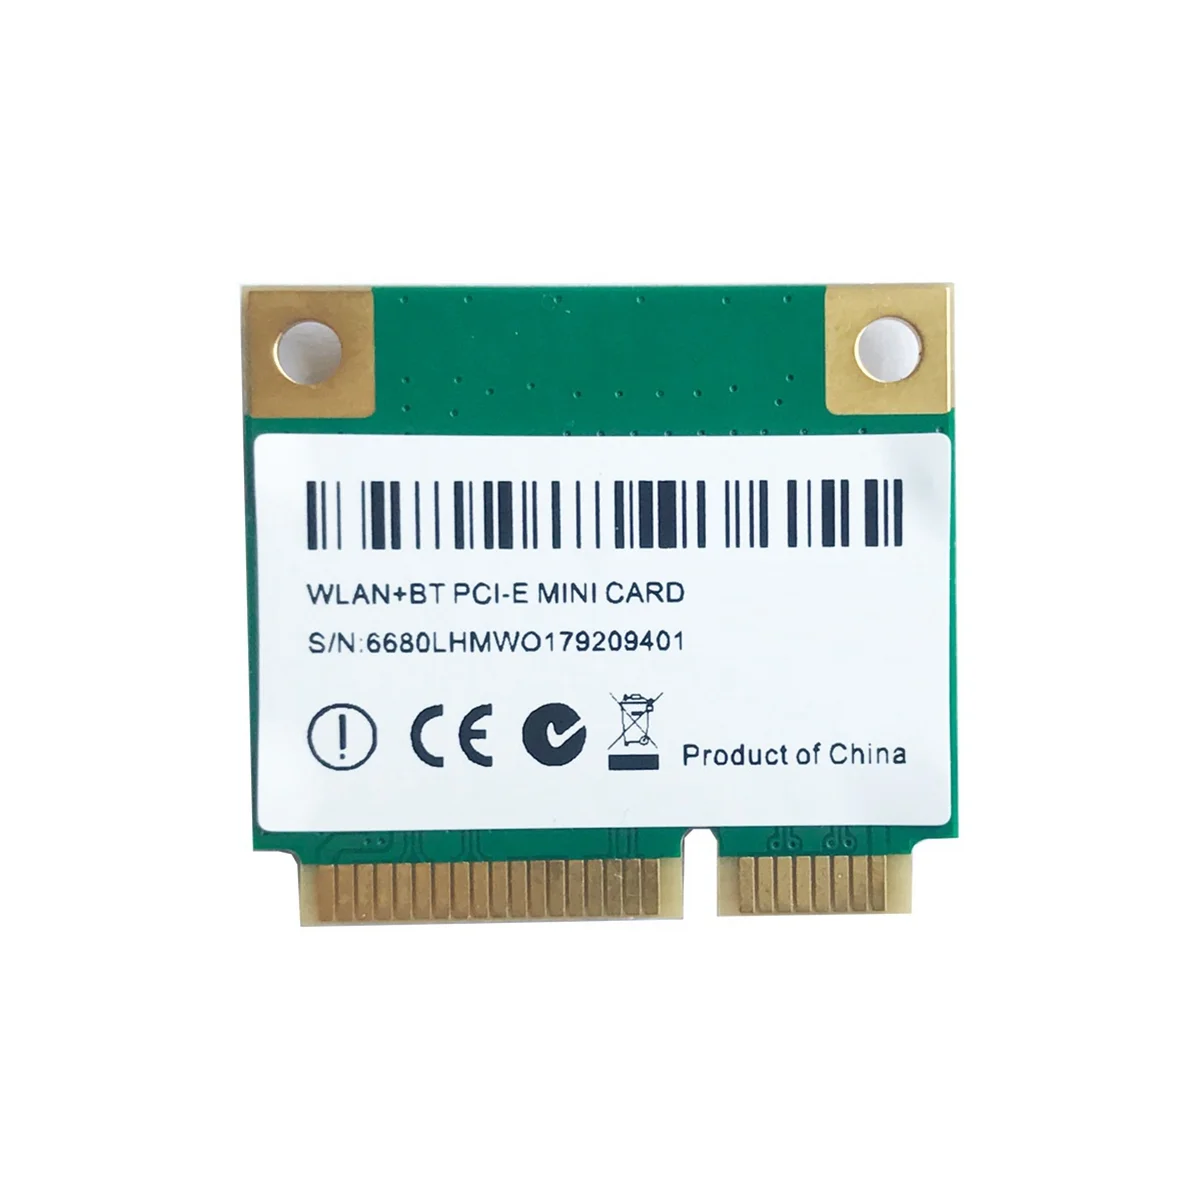 

1200Mbps Wireless MC-AC7265 Dual Band Mini PCI-E WiFi Card Bluetooth 4.2 802.11Ac Dual Band 2.4G 5Ghz Adapter for Laptop